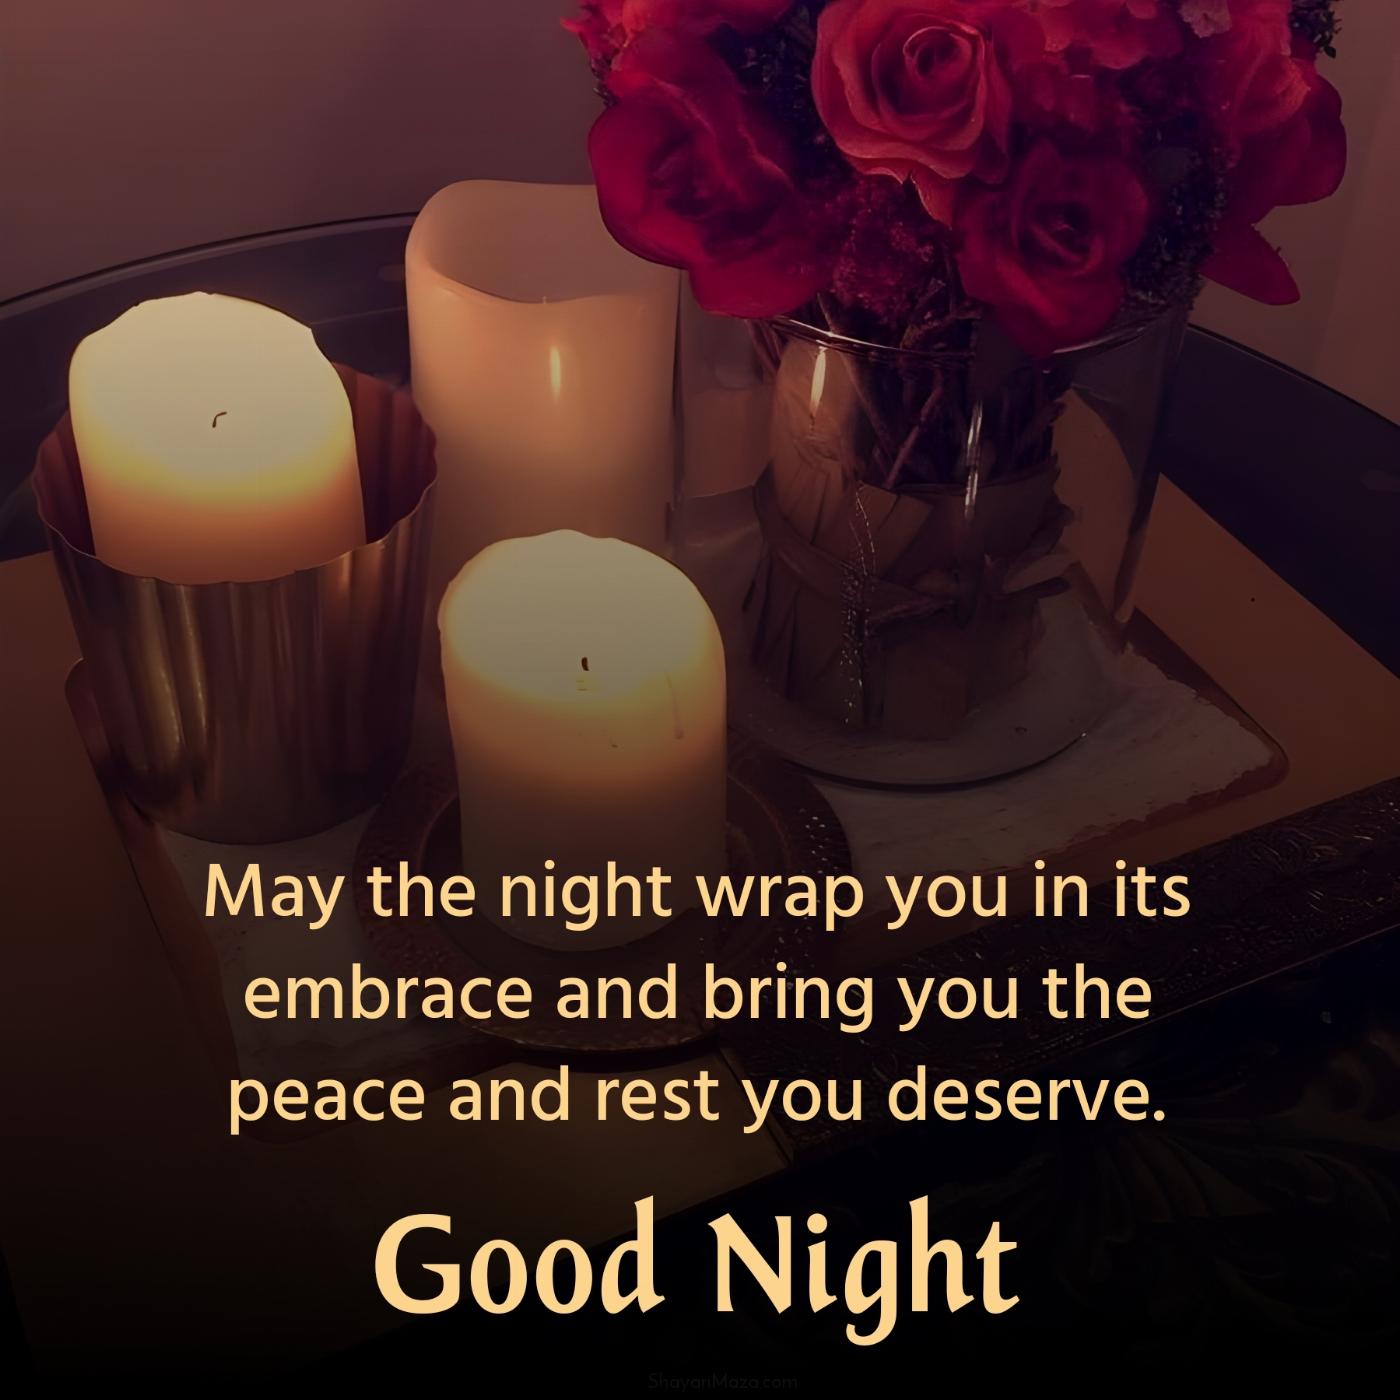 May the night wrap you in its embrace and bring you the peace